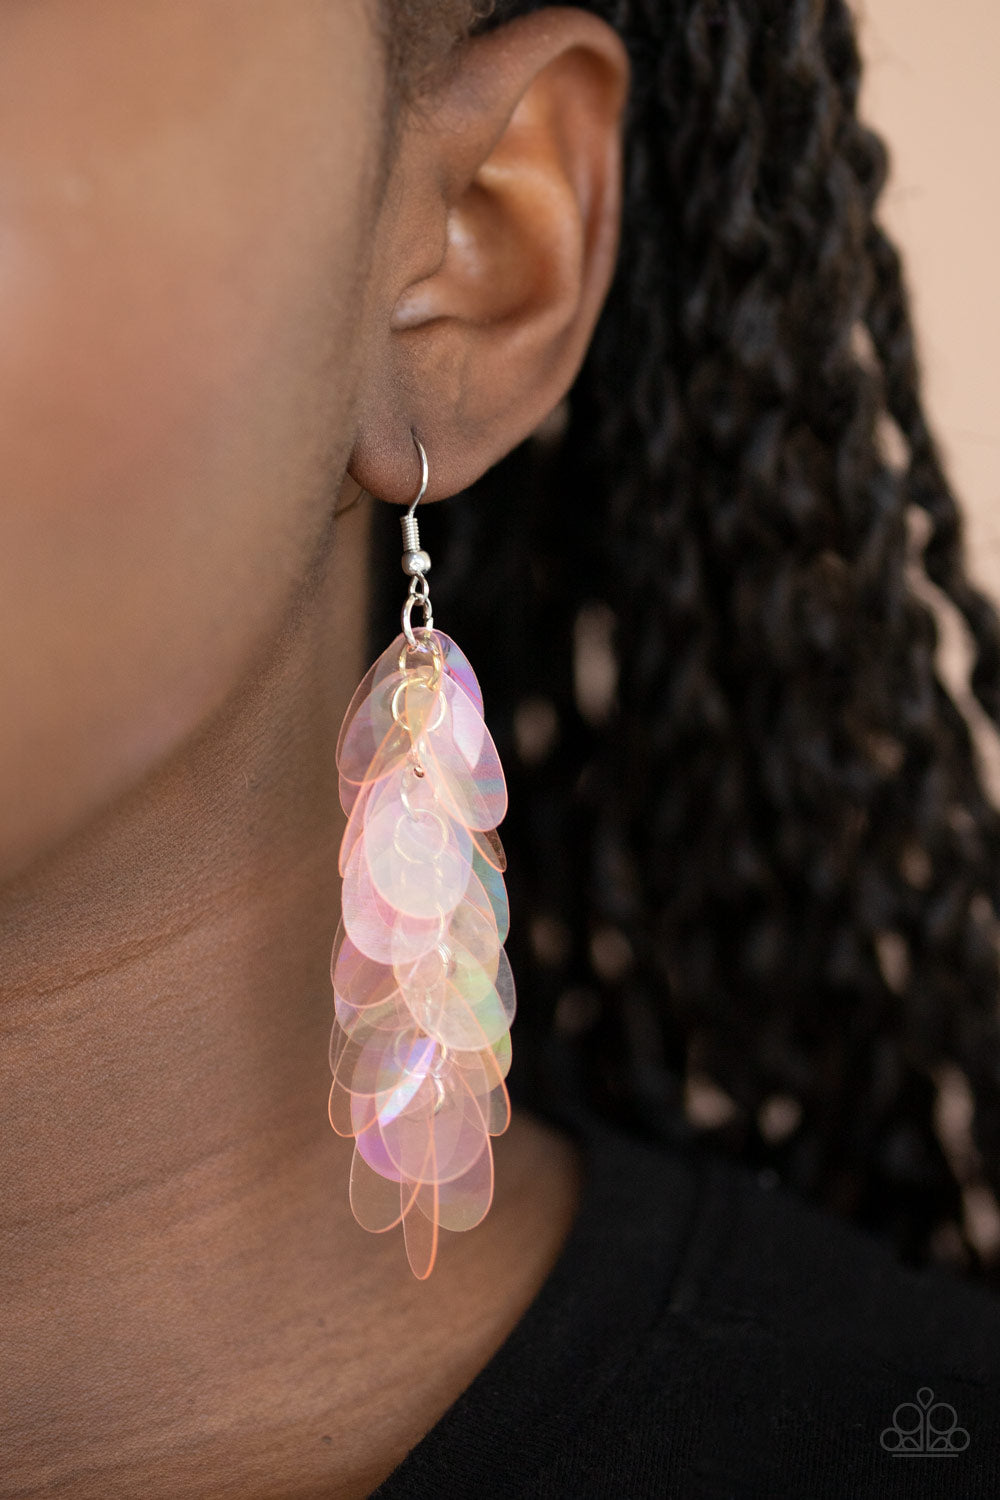 Stellar In Sequins Pink Earring - Paparazzi Accessories.  Featuring an iridescent shimmer, oversized oval pink sequins cascade from the ear, creating a playful fringe. Earring attaches to a standard fishhook fitting. All Paparazzi Accessories are lead free and nickel free!  Sold as one pair of earrings.